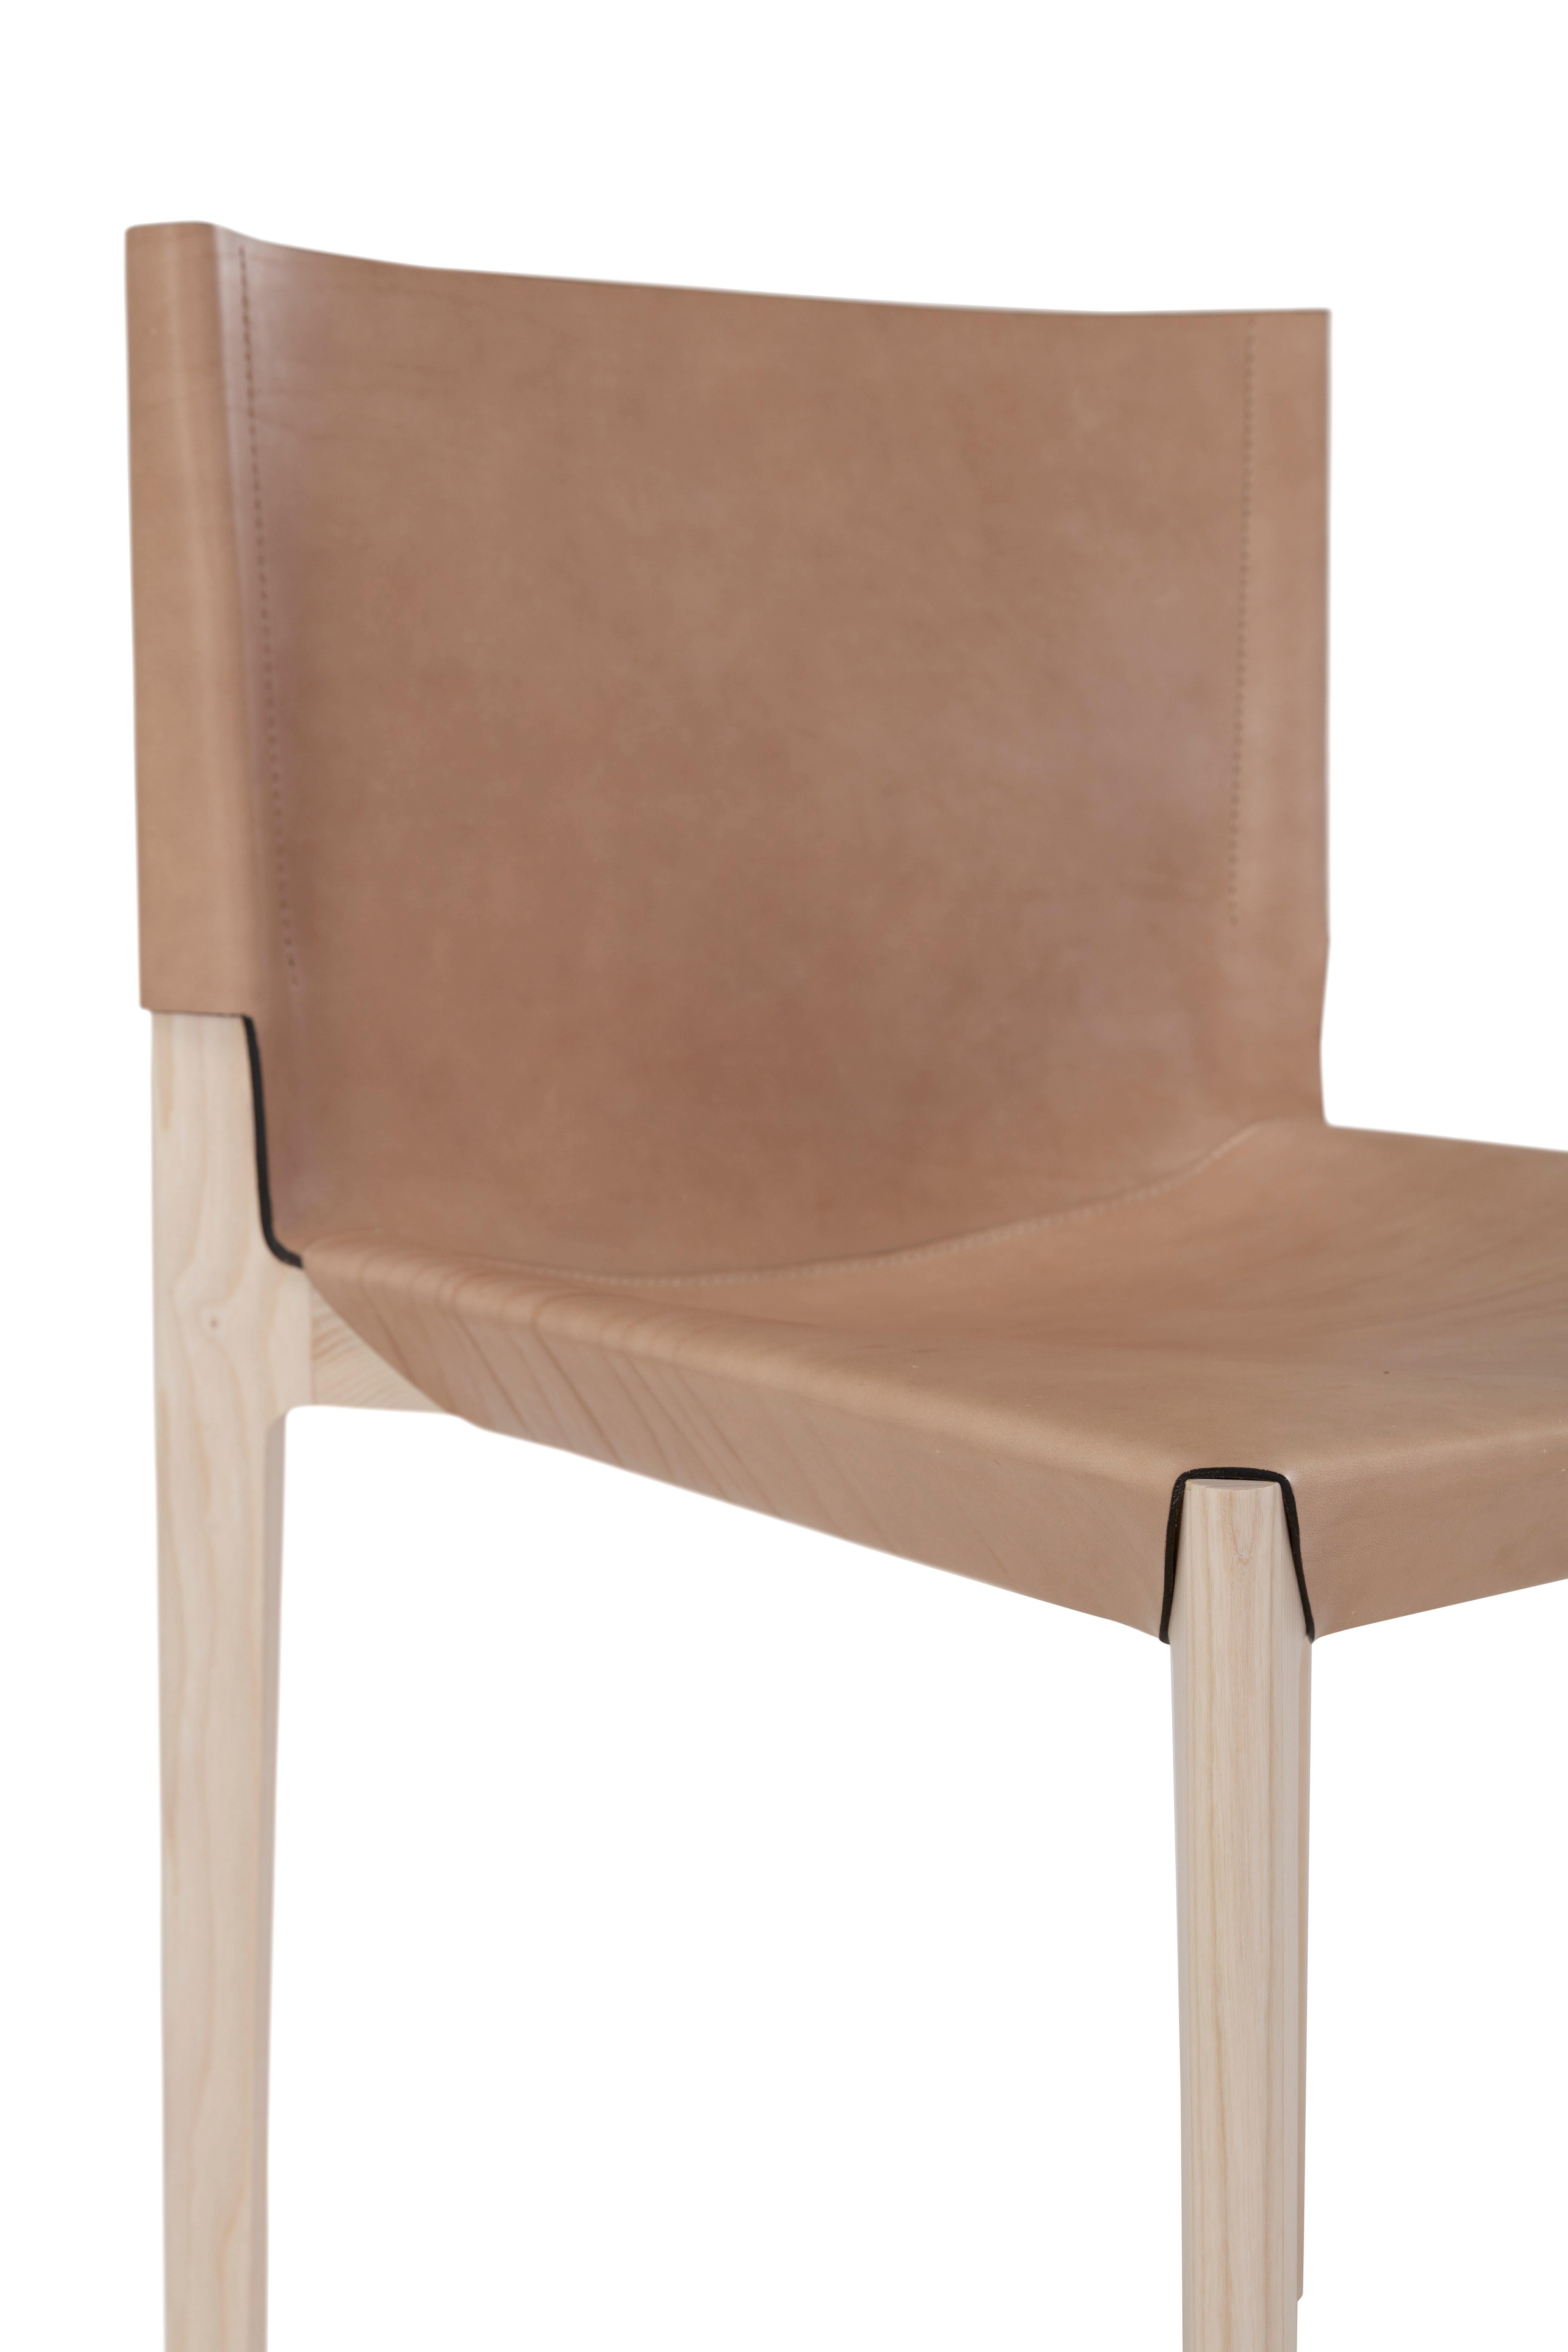 Contemporary Wooden Chair 'Stilt', Cuoio Leather For Sale 4